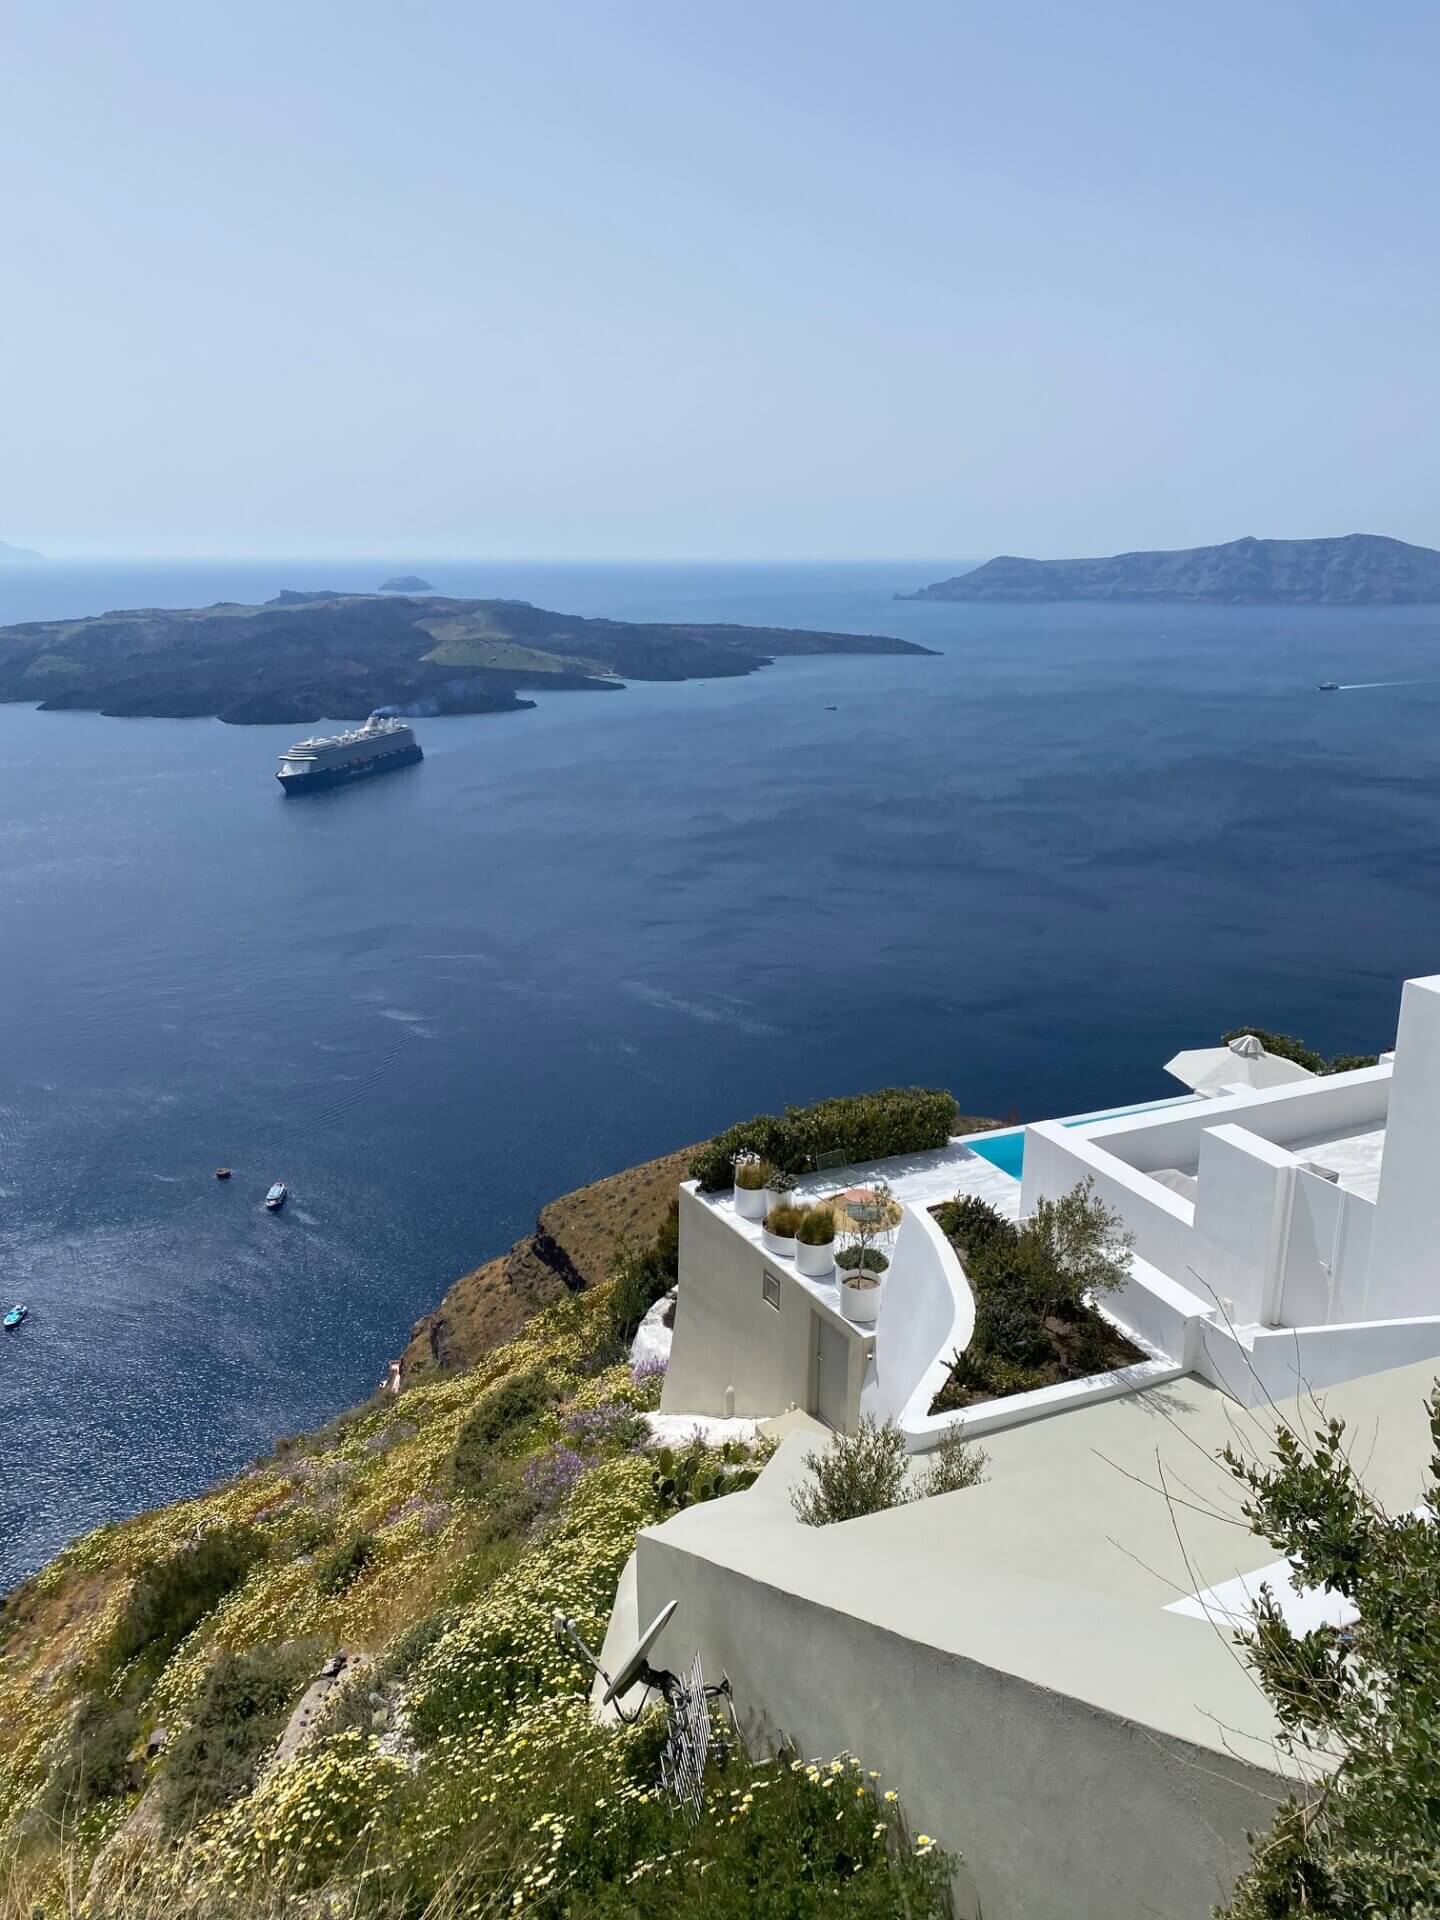 travel advice to greece from uk